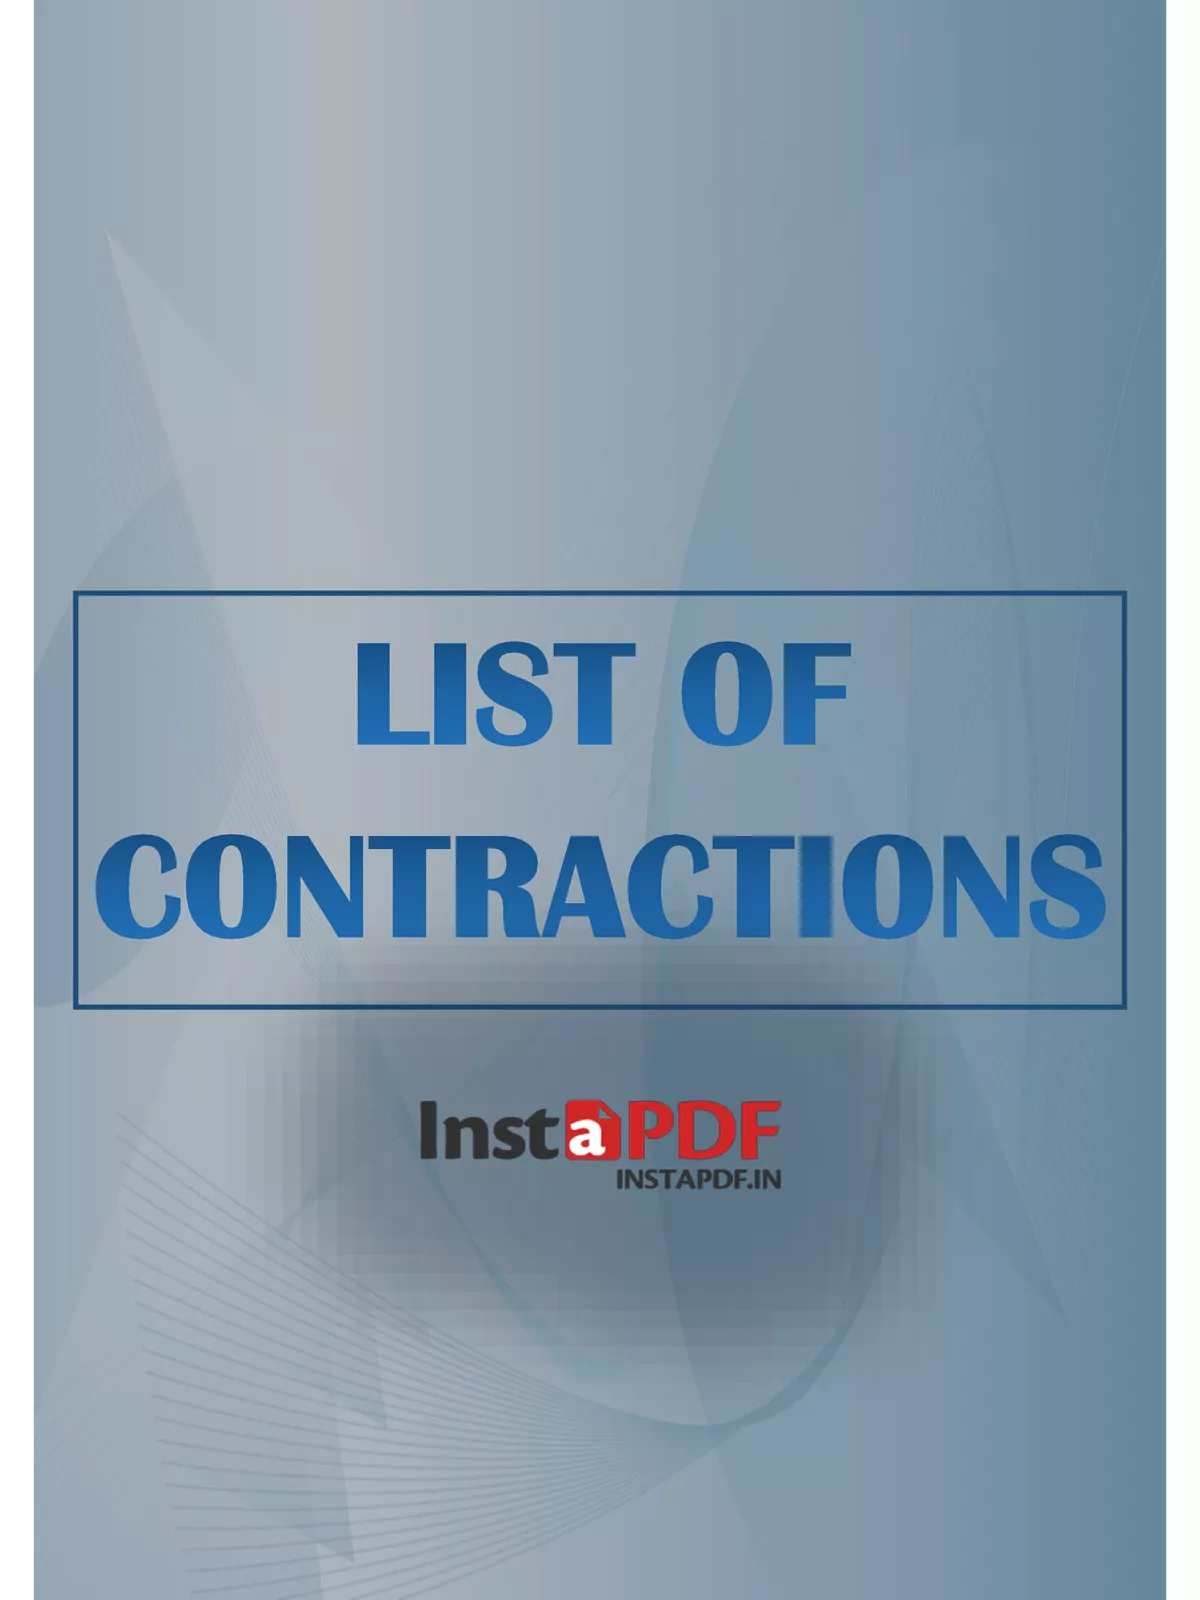 List of Contractions